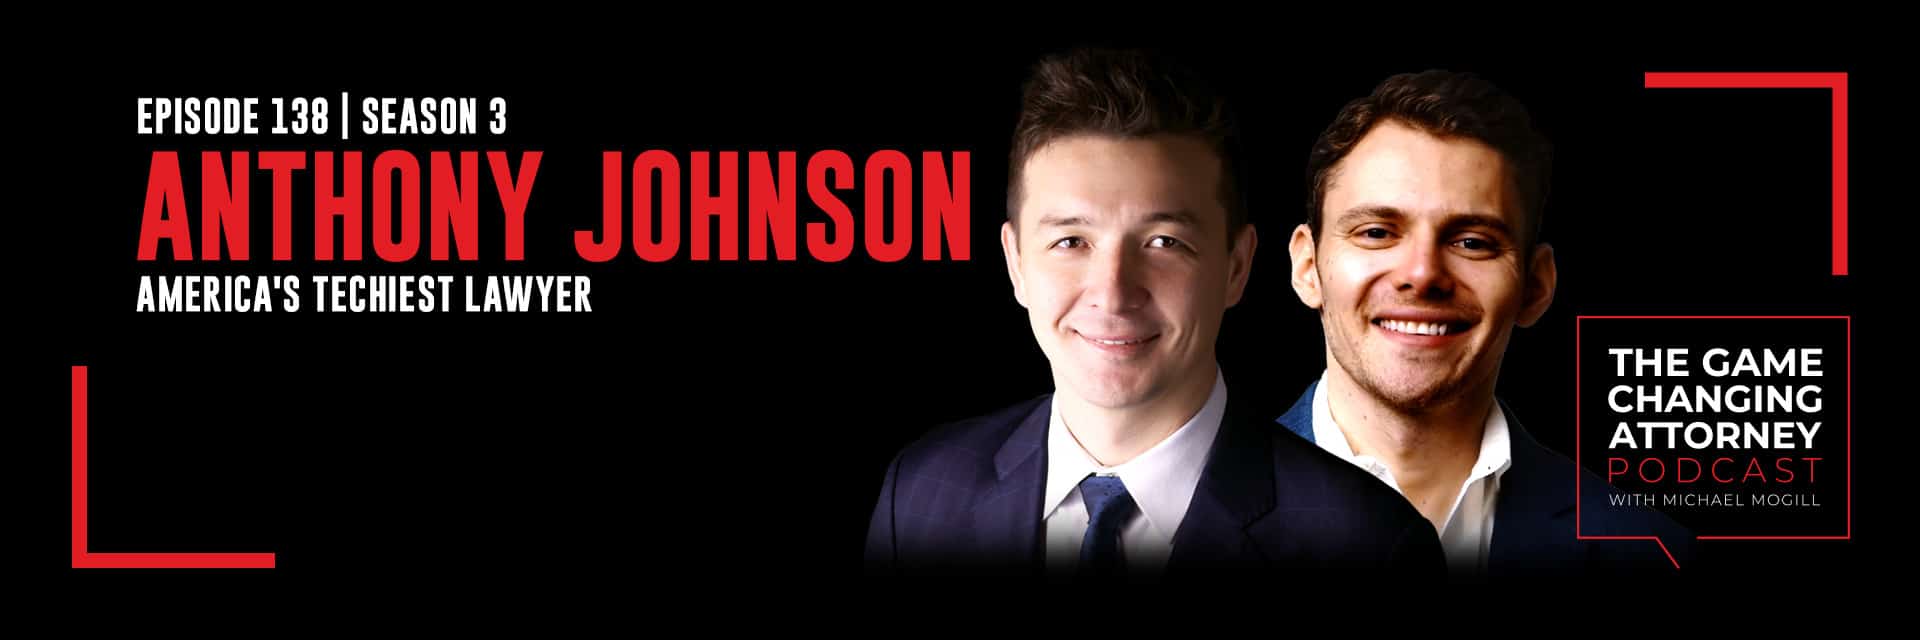 The Game Changing Attorney Podcast - Anthony Johnson